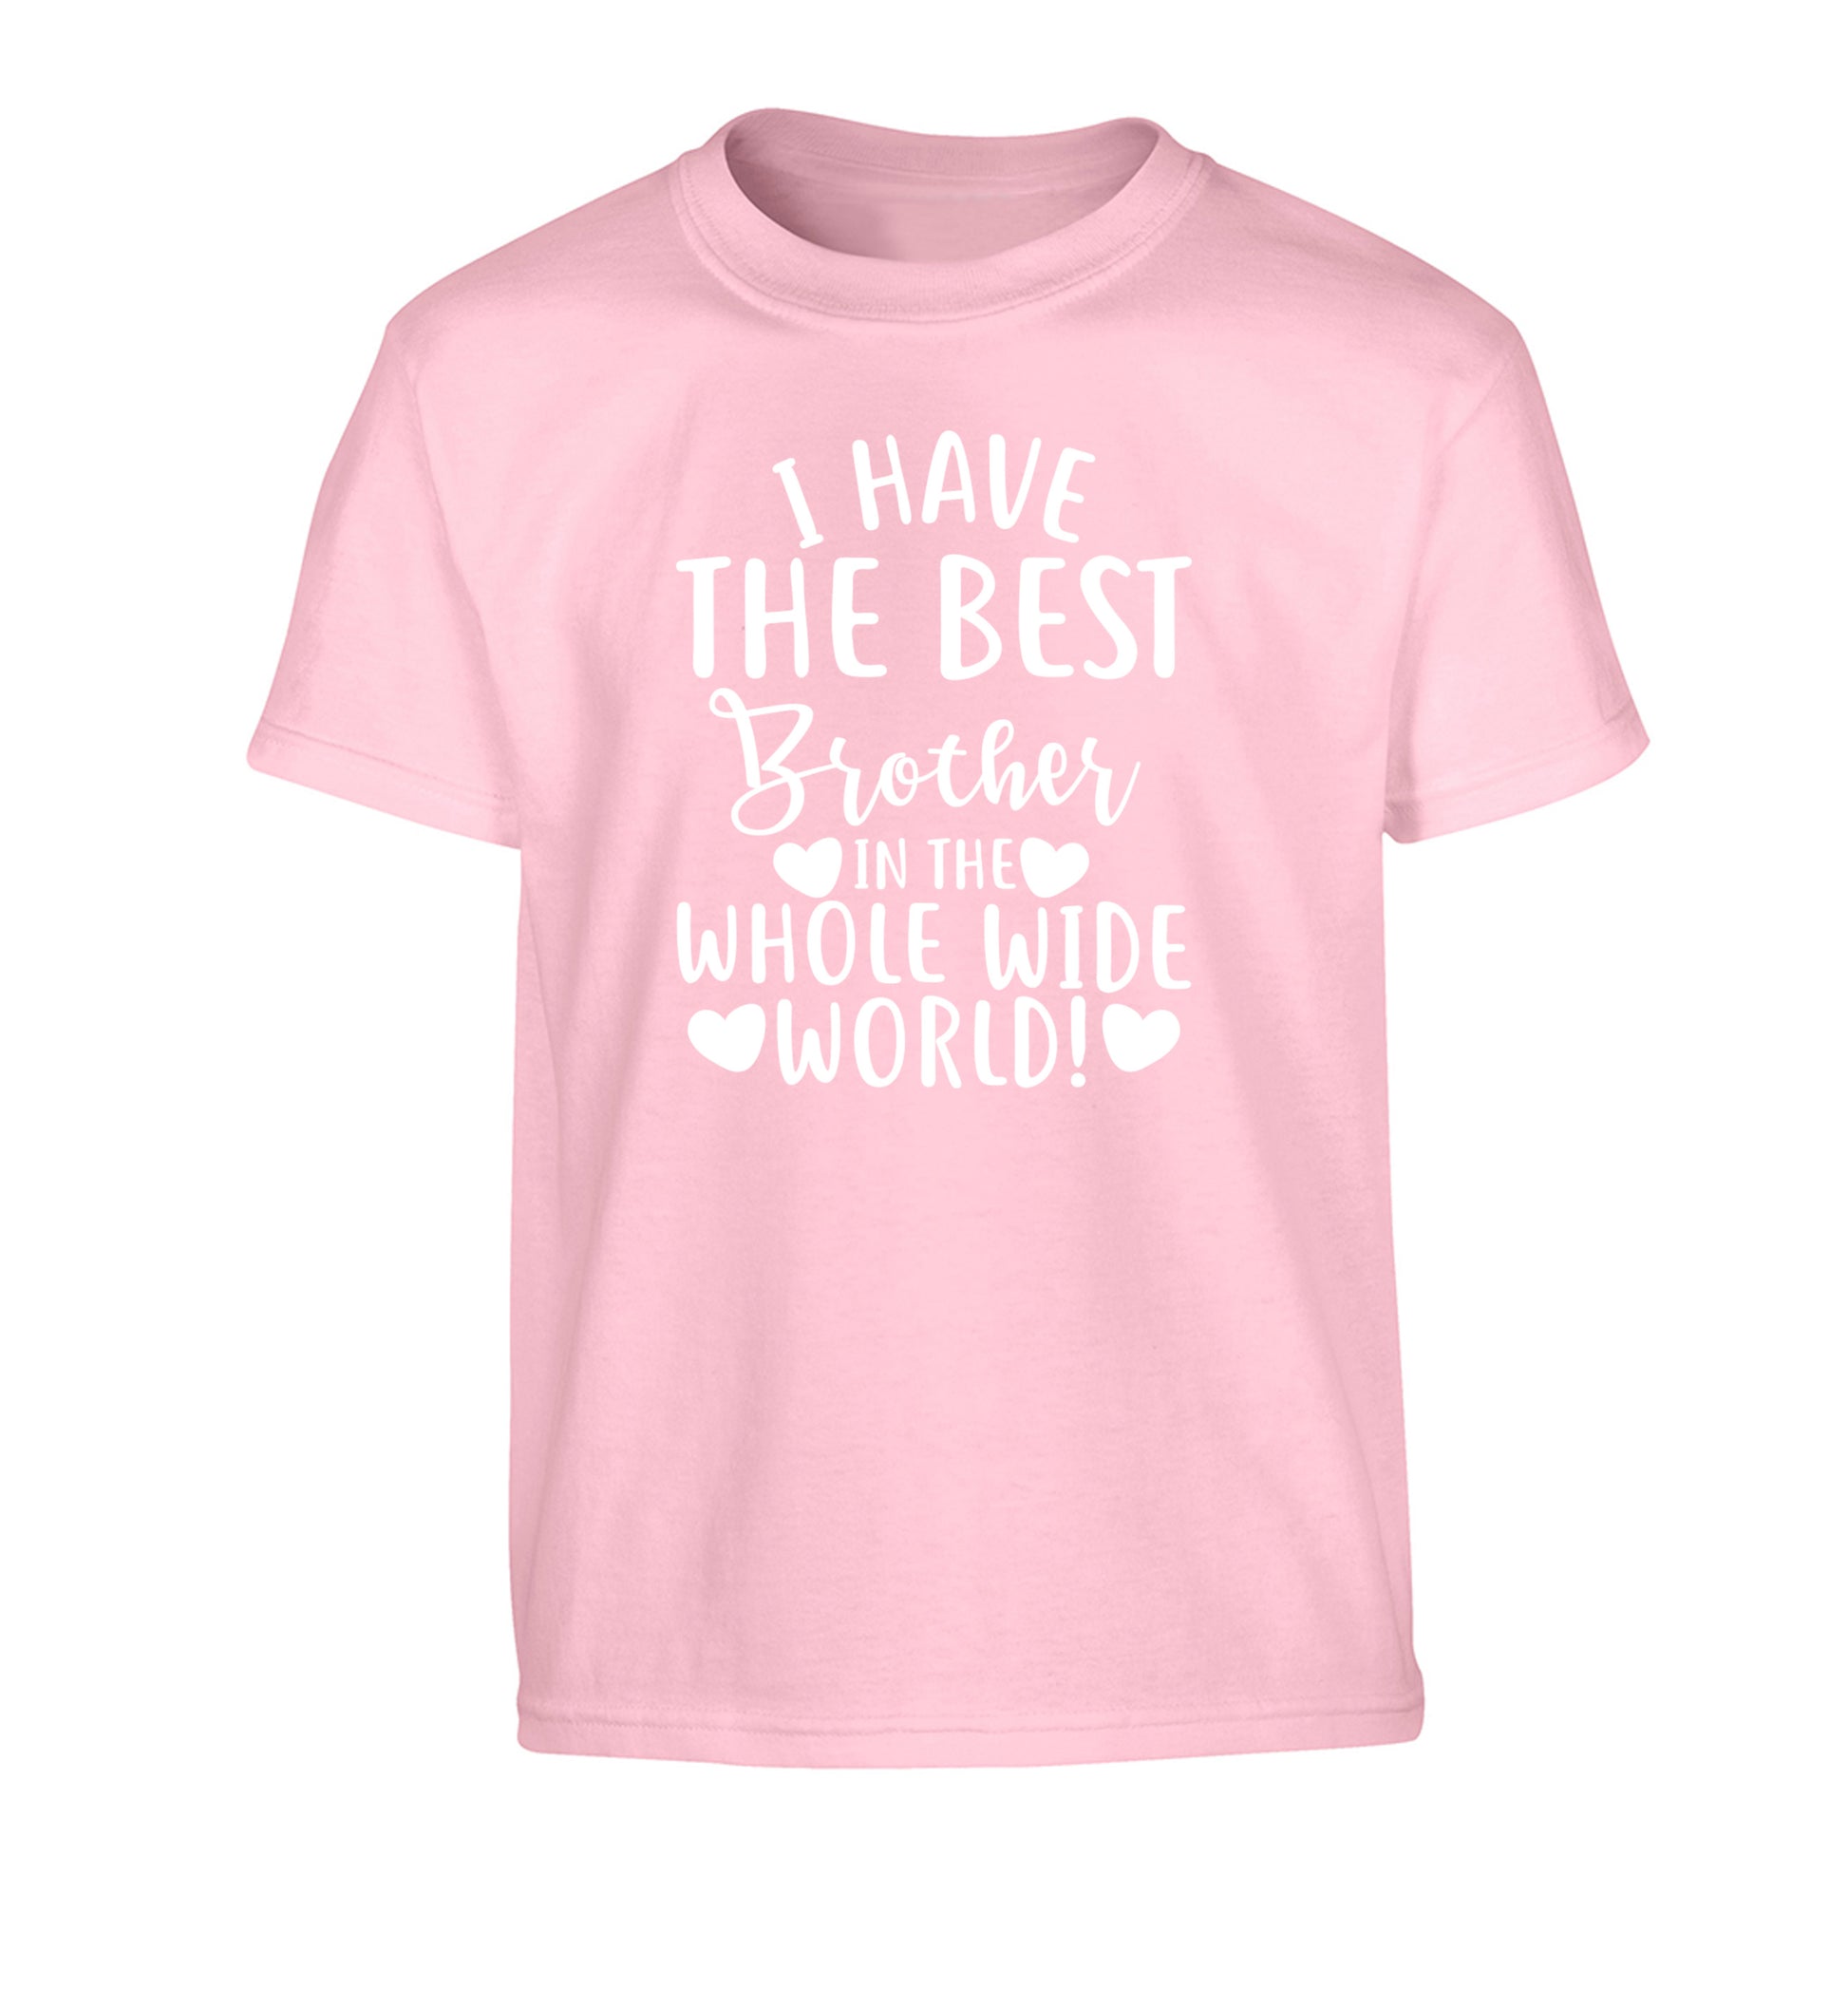 I have the best brother in the whole wide world! Children's light pink Tshirt 12-13 Years